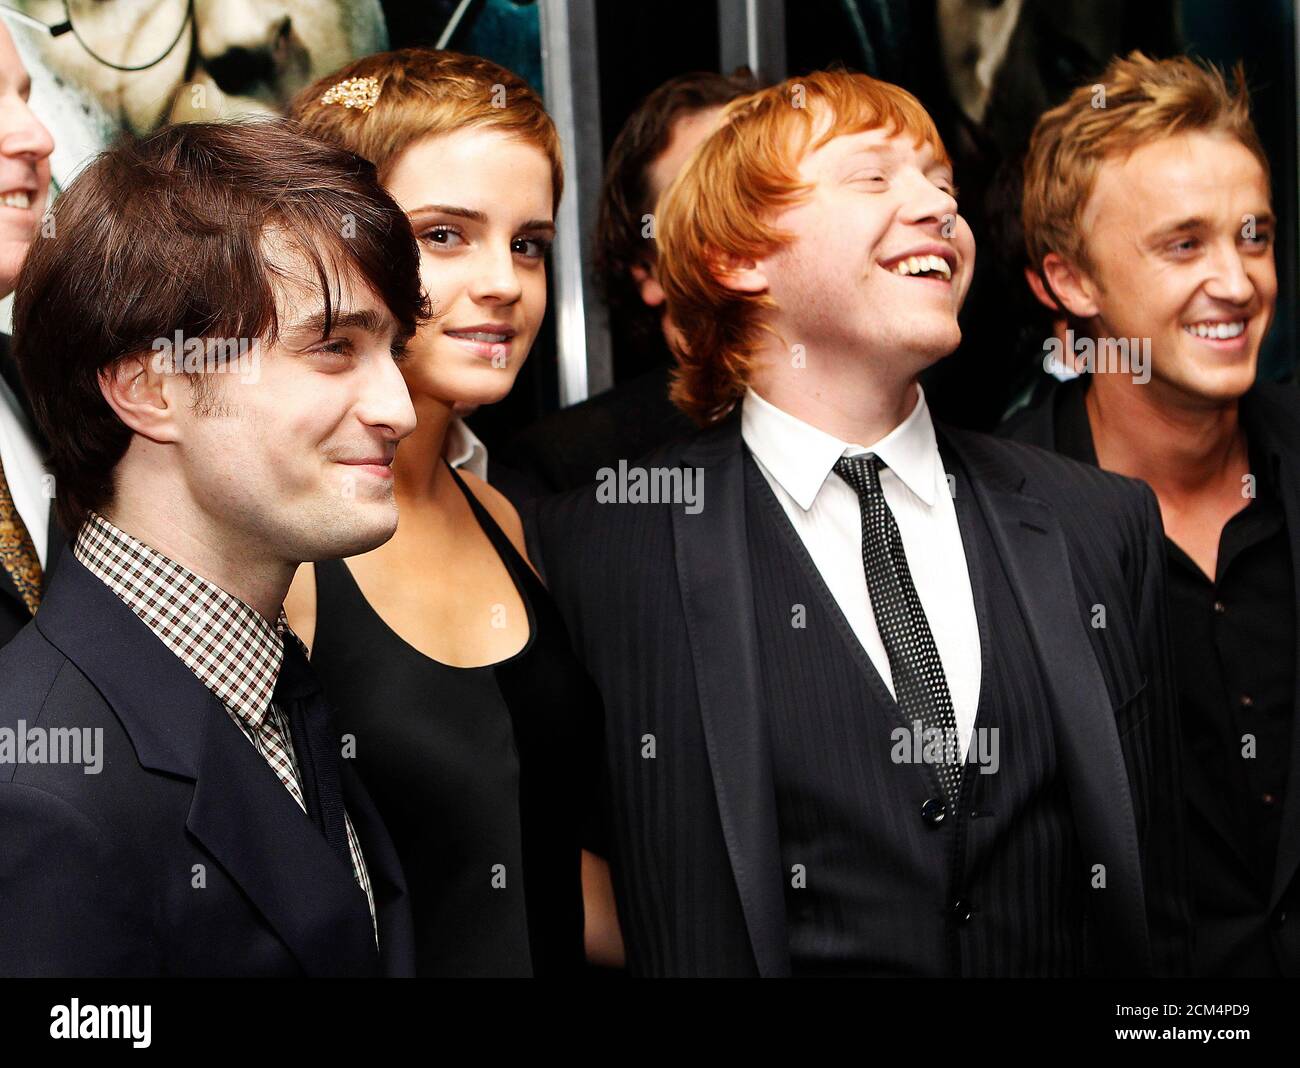 Actors (L-R) Daniel Radcliffe, Emma Watson, Rupert Grint and Tom Felton  pose at the premiere of "Harry Potter and the Deathly Hallows: Part 1" in  New York November 15, 2010. REUTERS/Shannon Stapleton (